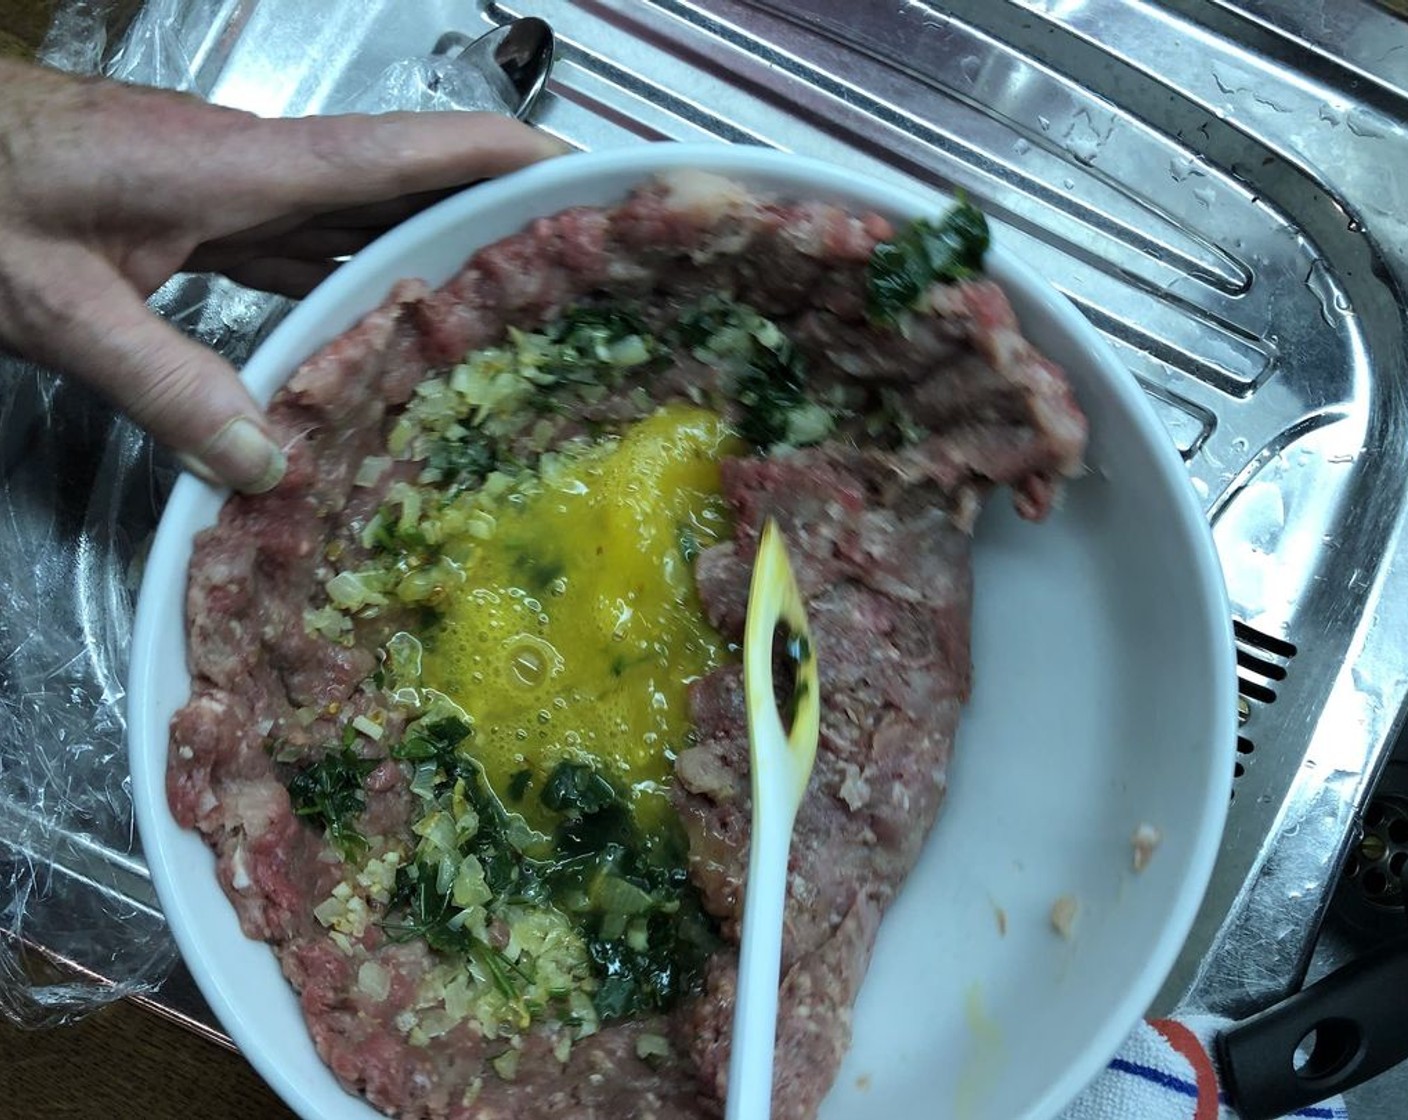 step 10 Fold ground beef in on itself towards the center, with the egg and onion mixture remaining inside the "pocket".